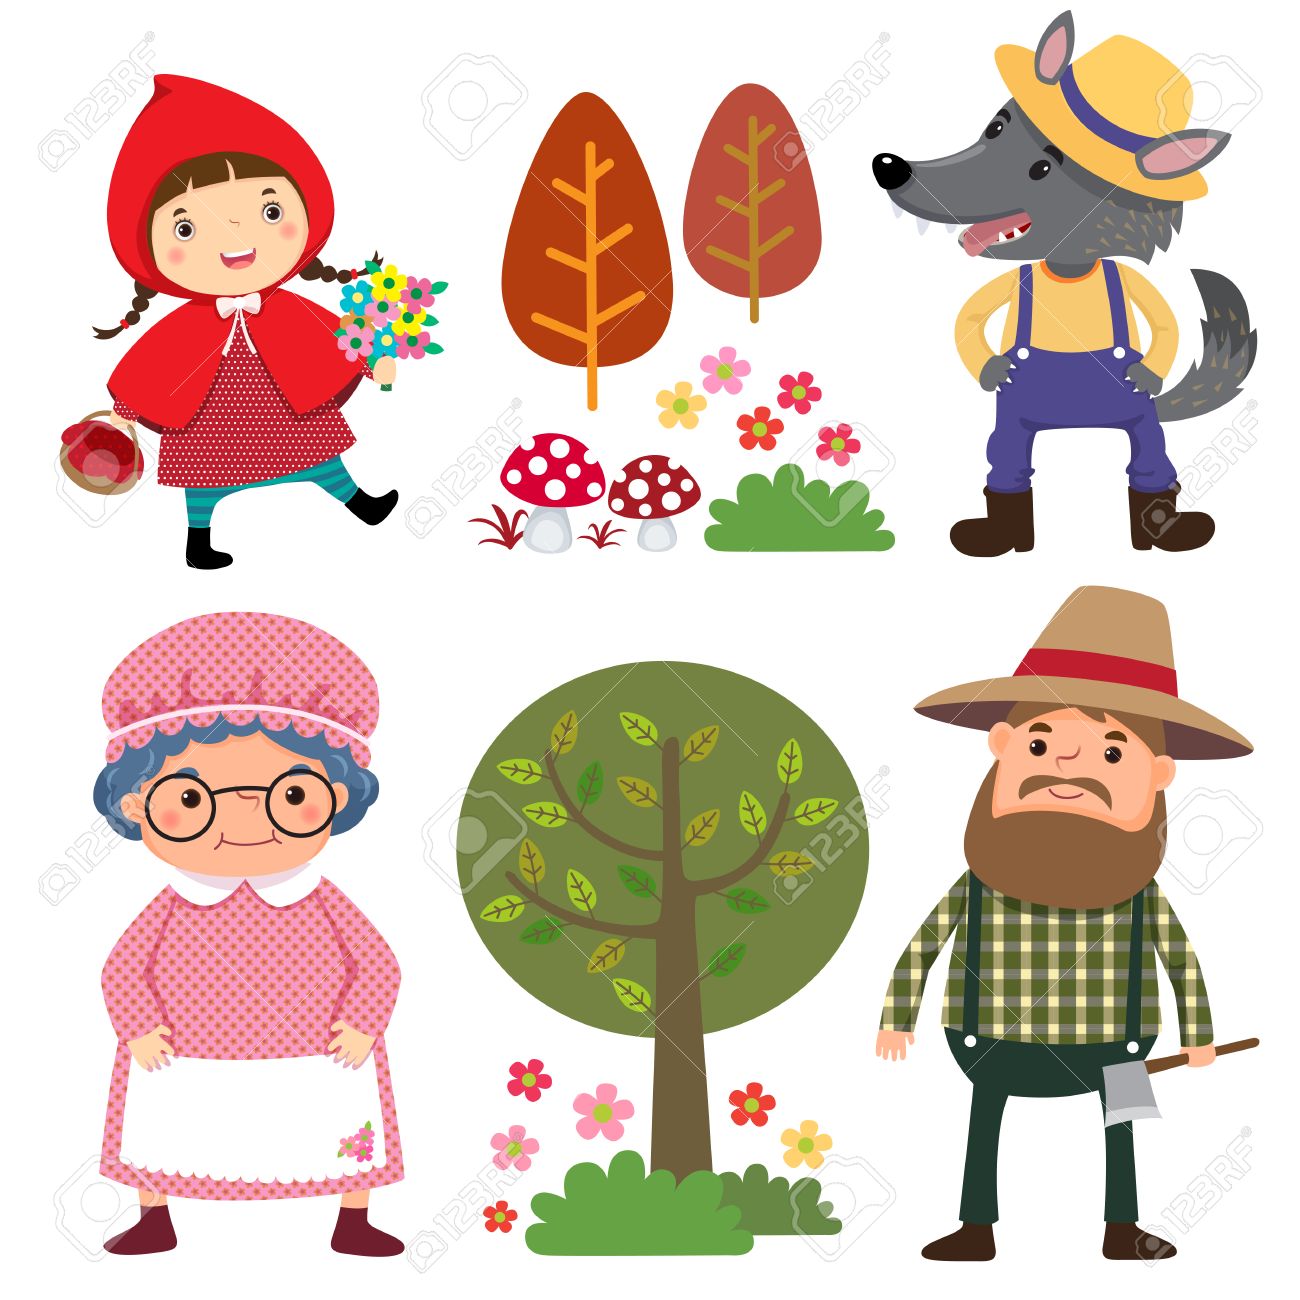 Character Clipart red riding hood